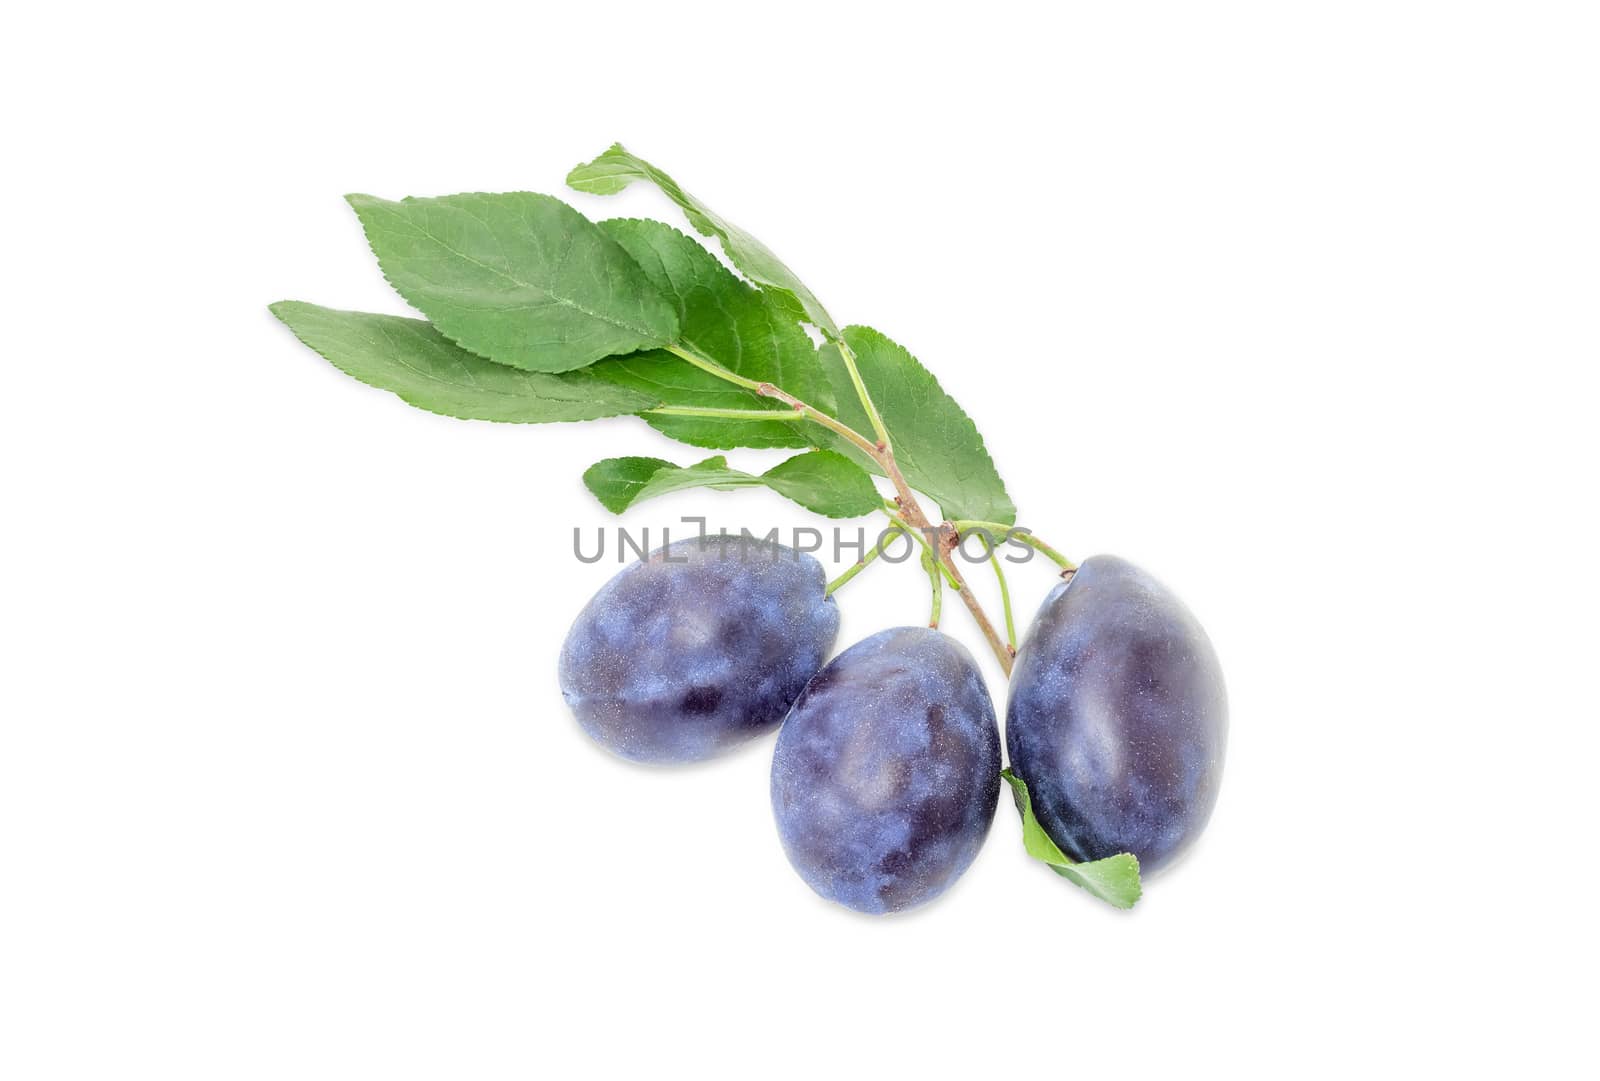 Several ripe plums on a branch with leaves closeup on a white background
